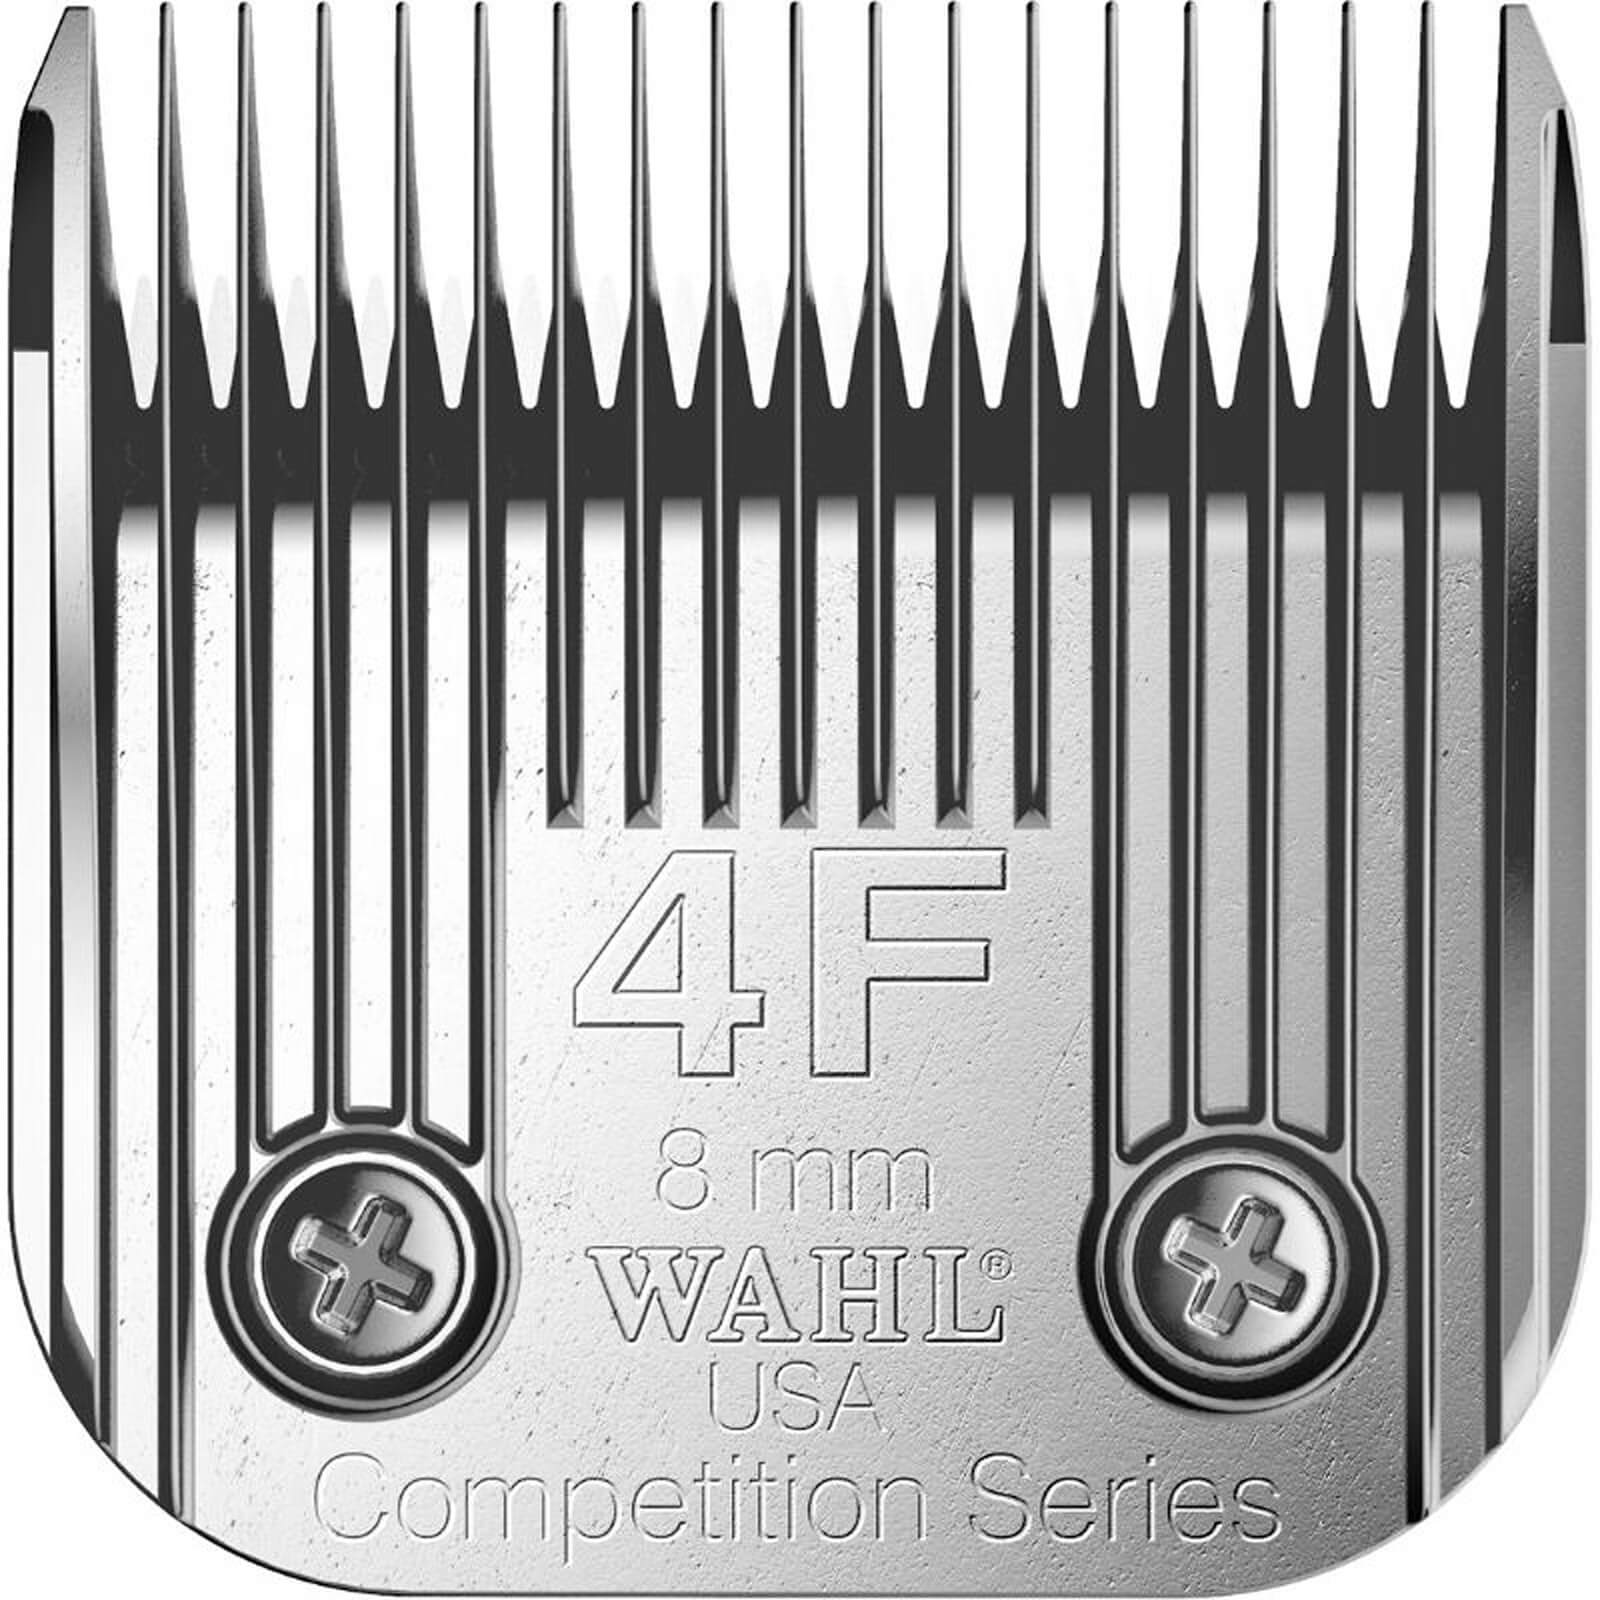 Wahl Competition Series Detachable Blade Set #4F/8mm Extra Coarse